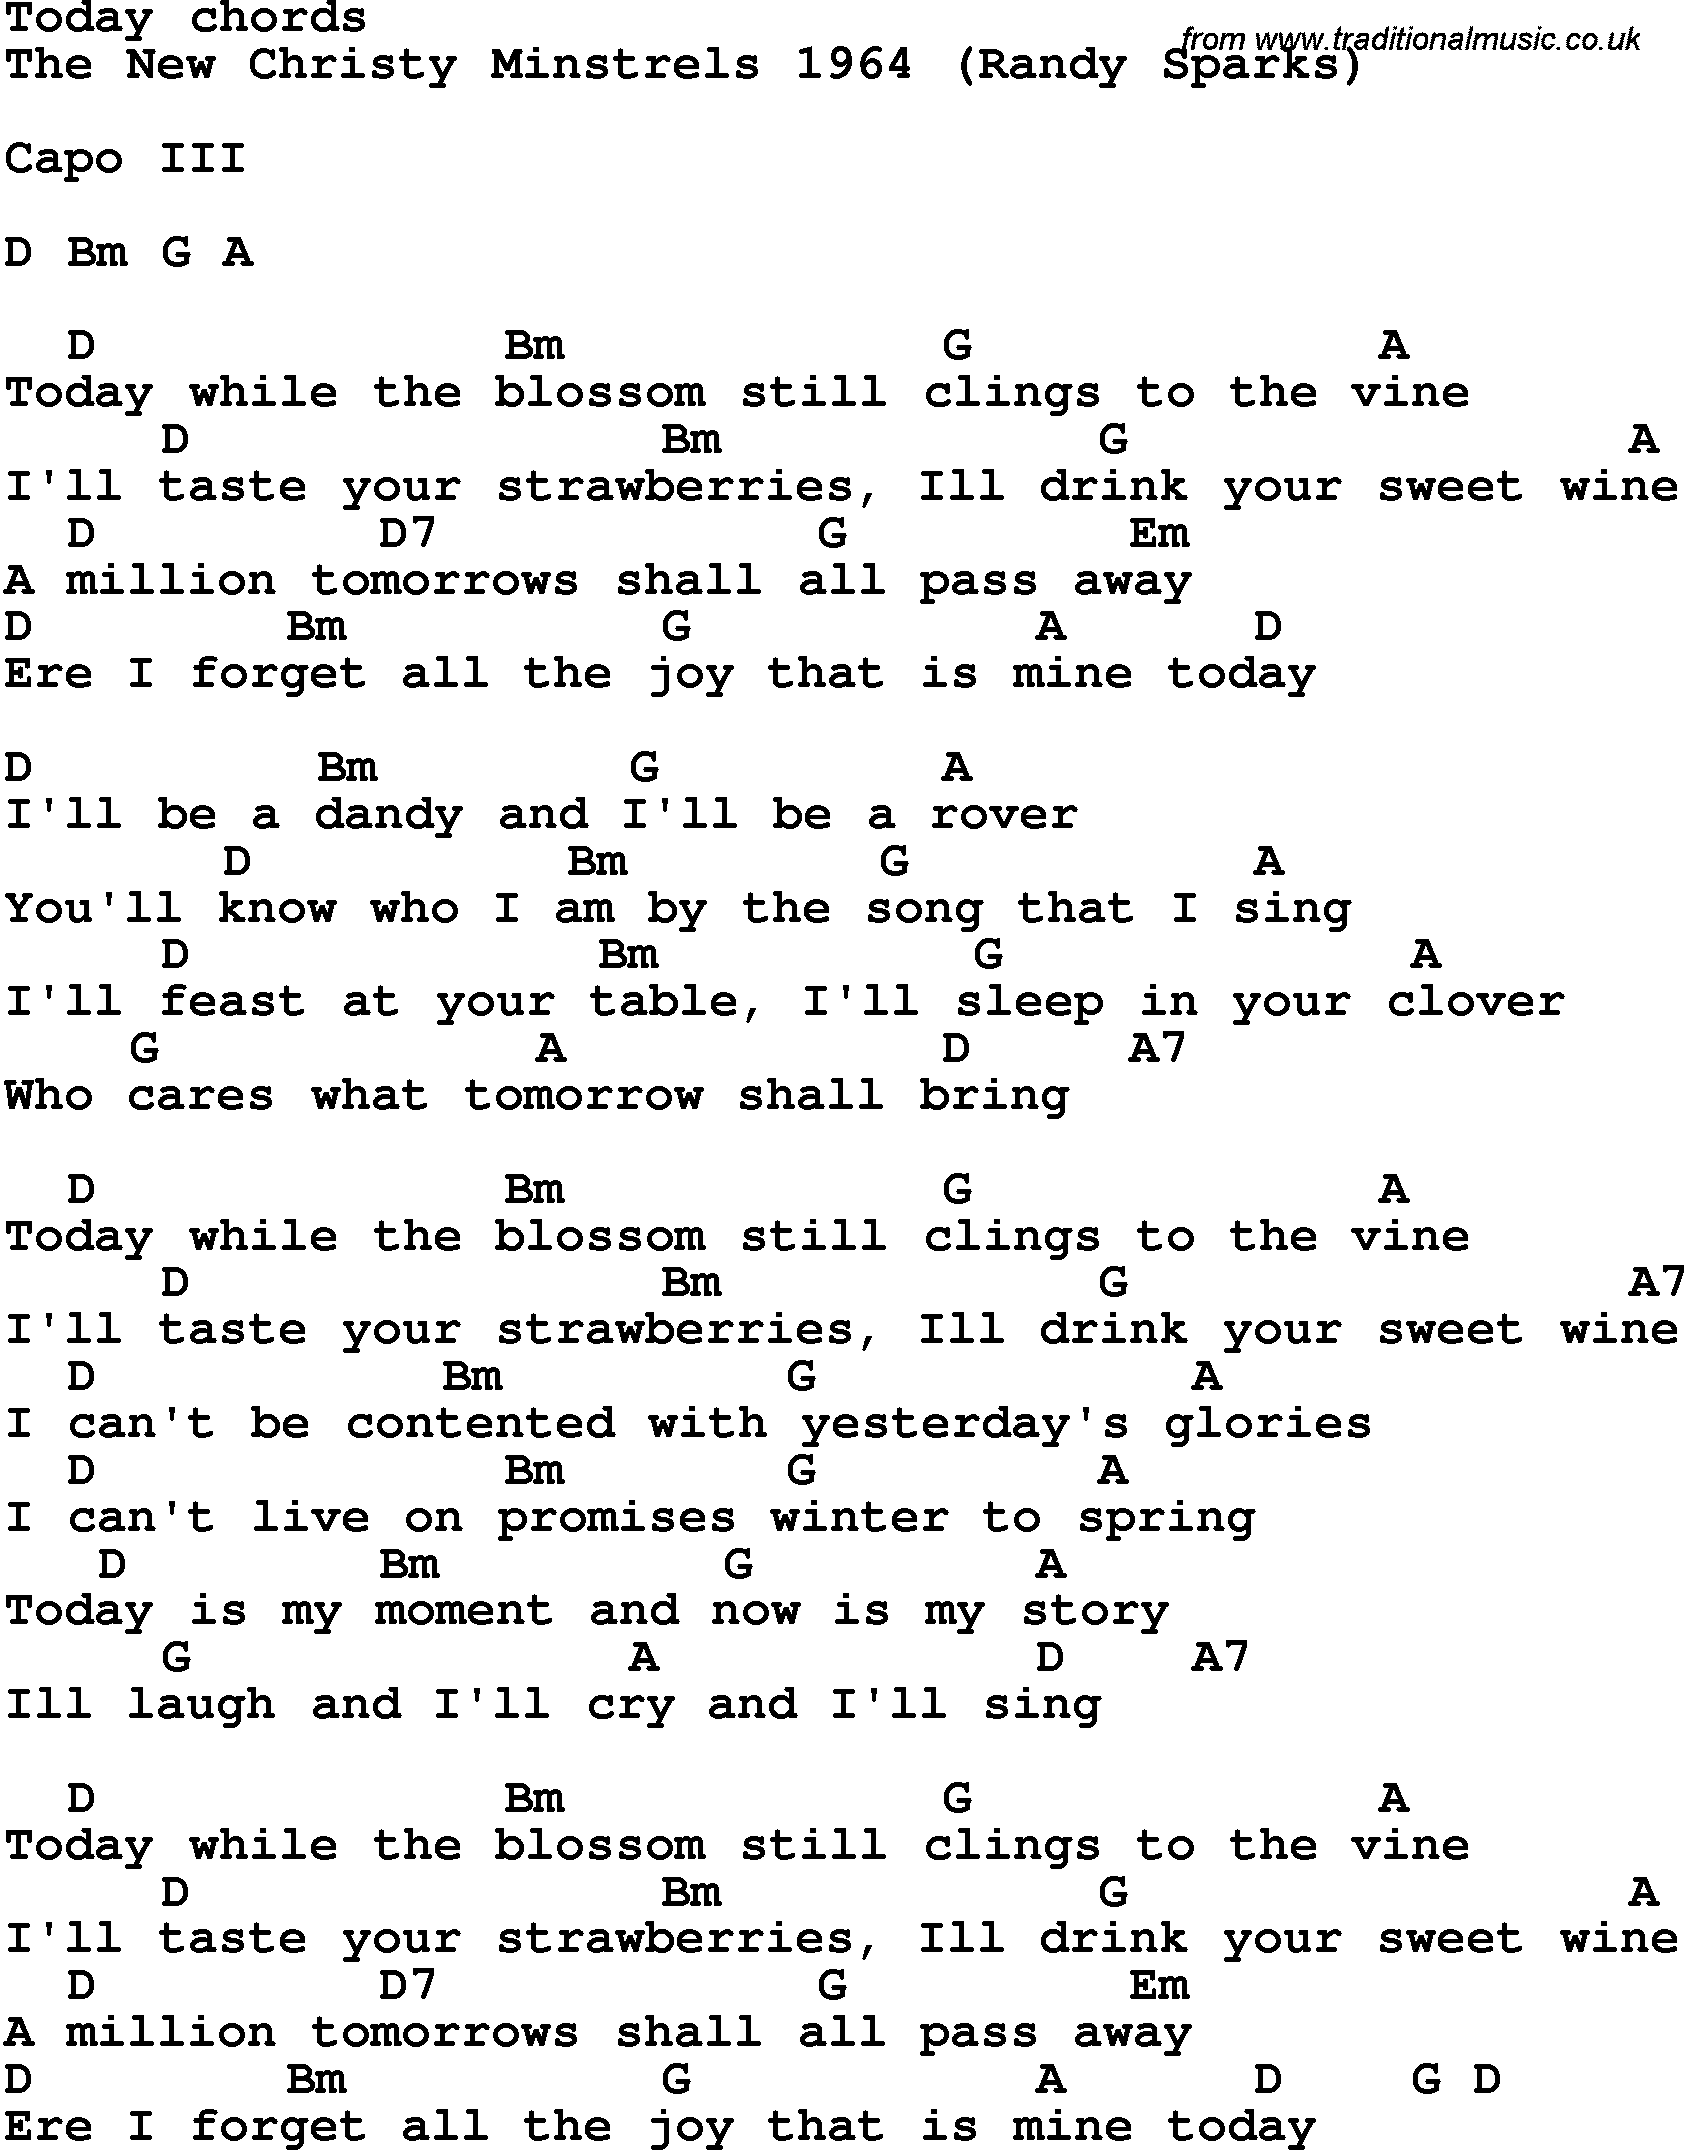 Song Lyrics with guitar chords for Today - The New Christy Minstrels 1964